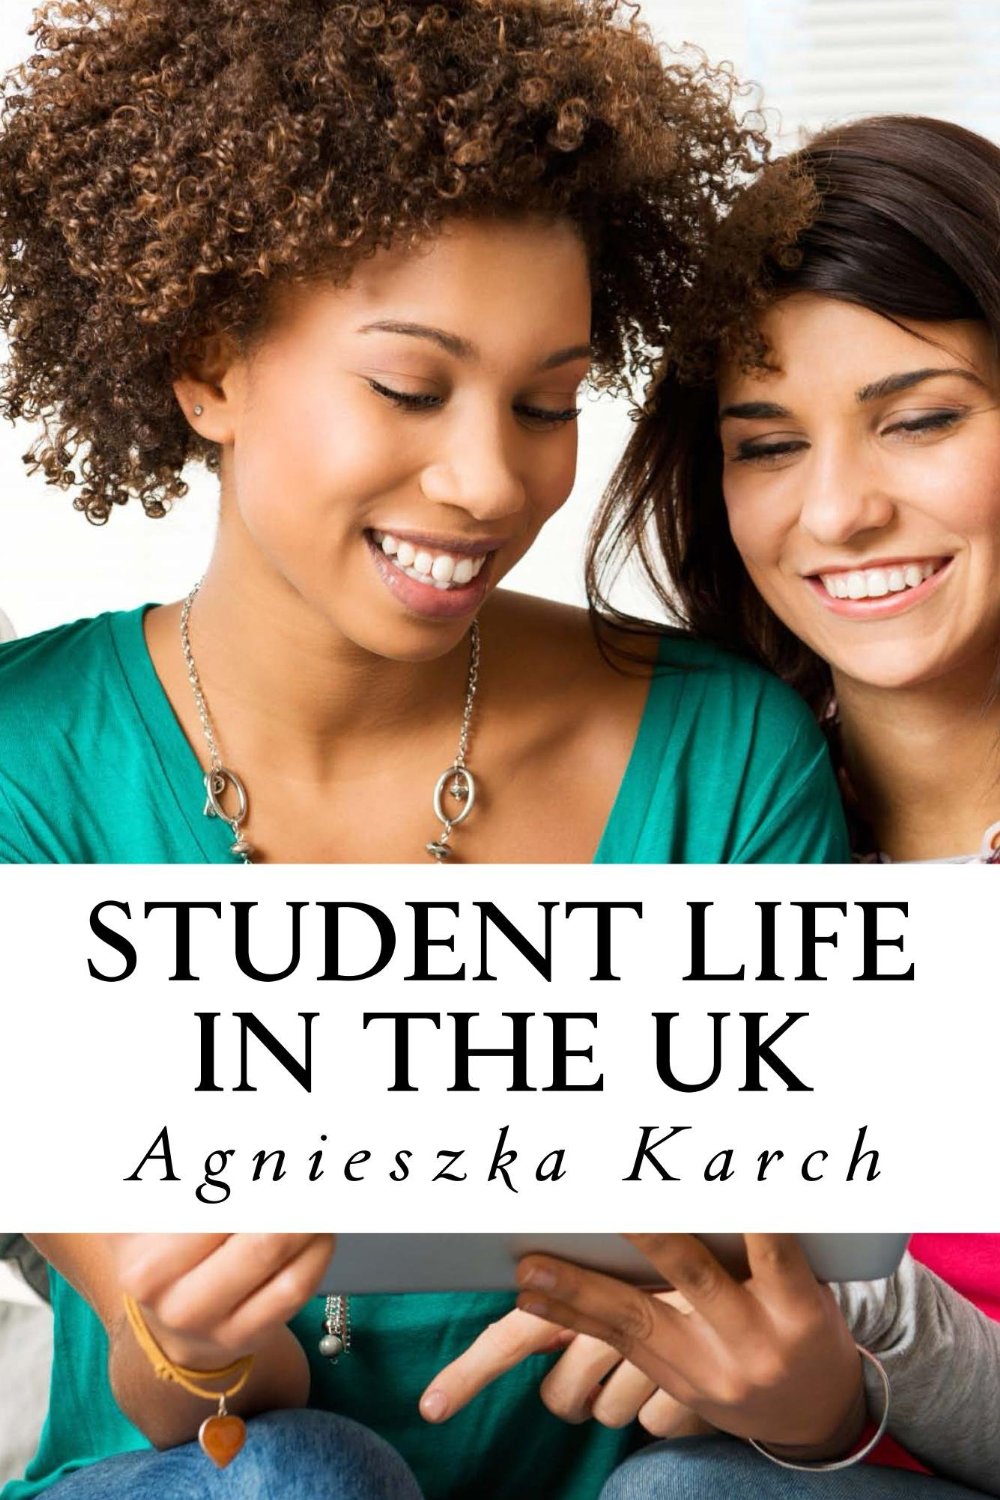 Student life in the UK: A guide for international students by Agnieszka Karch